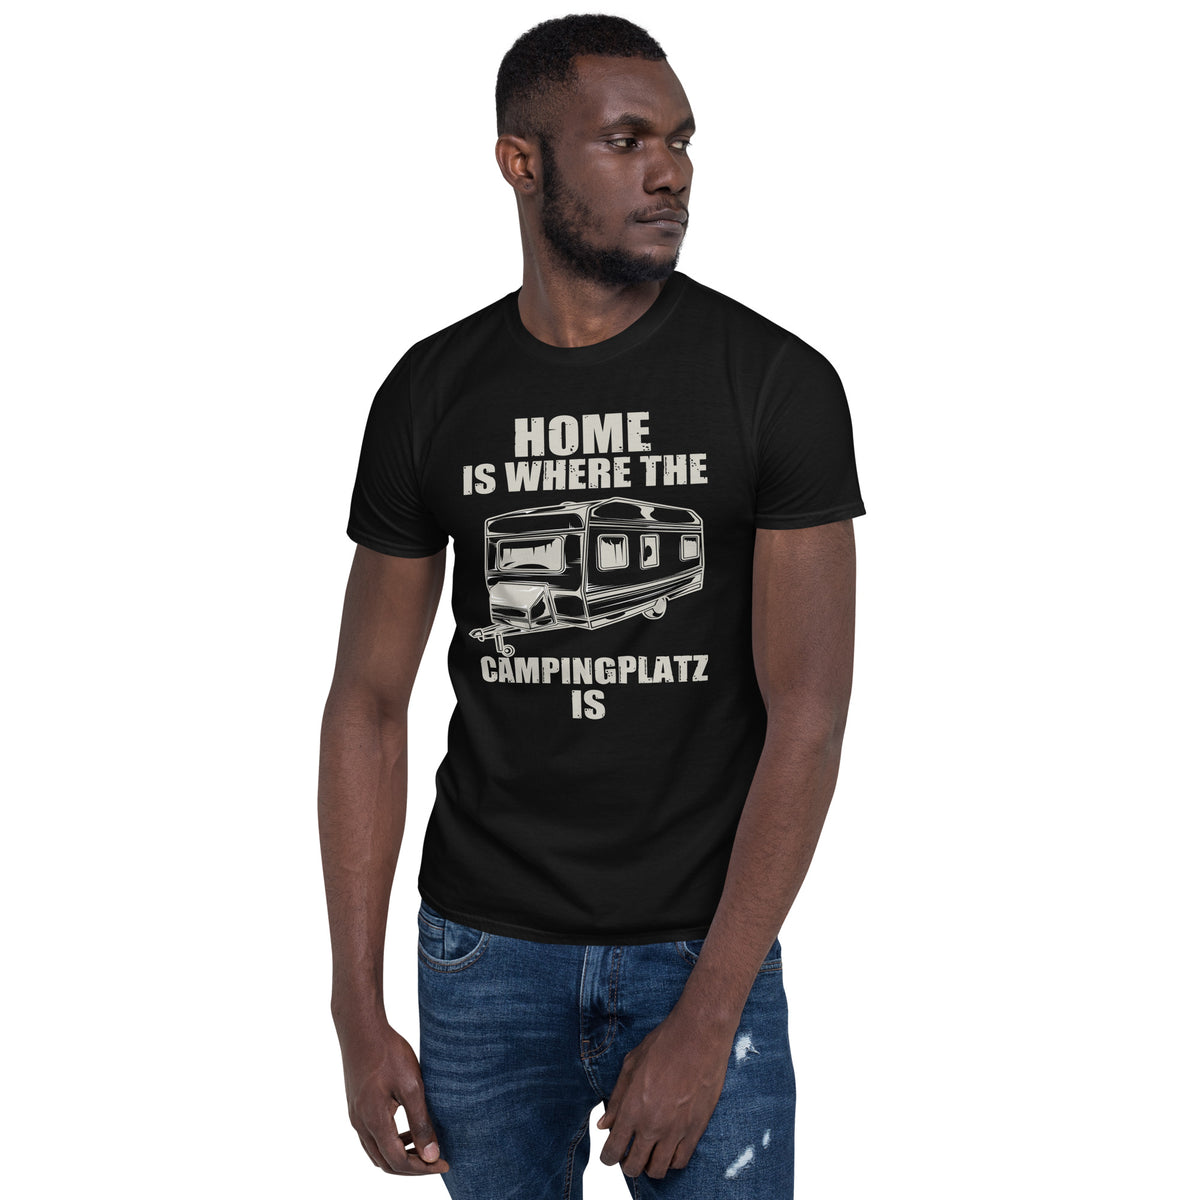 Cooles Herren Spruch Shirt "Home is where the..."